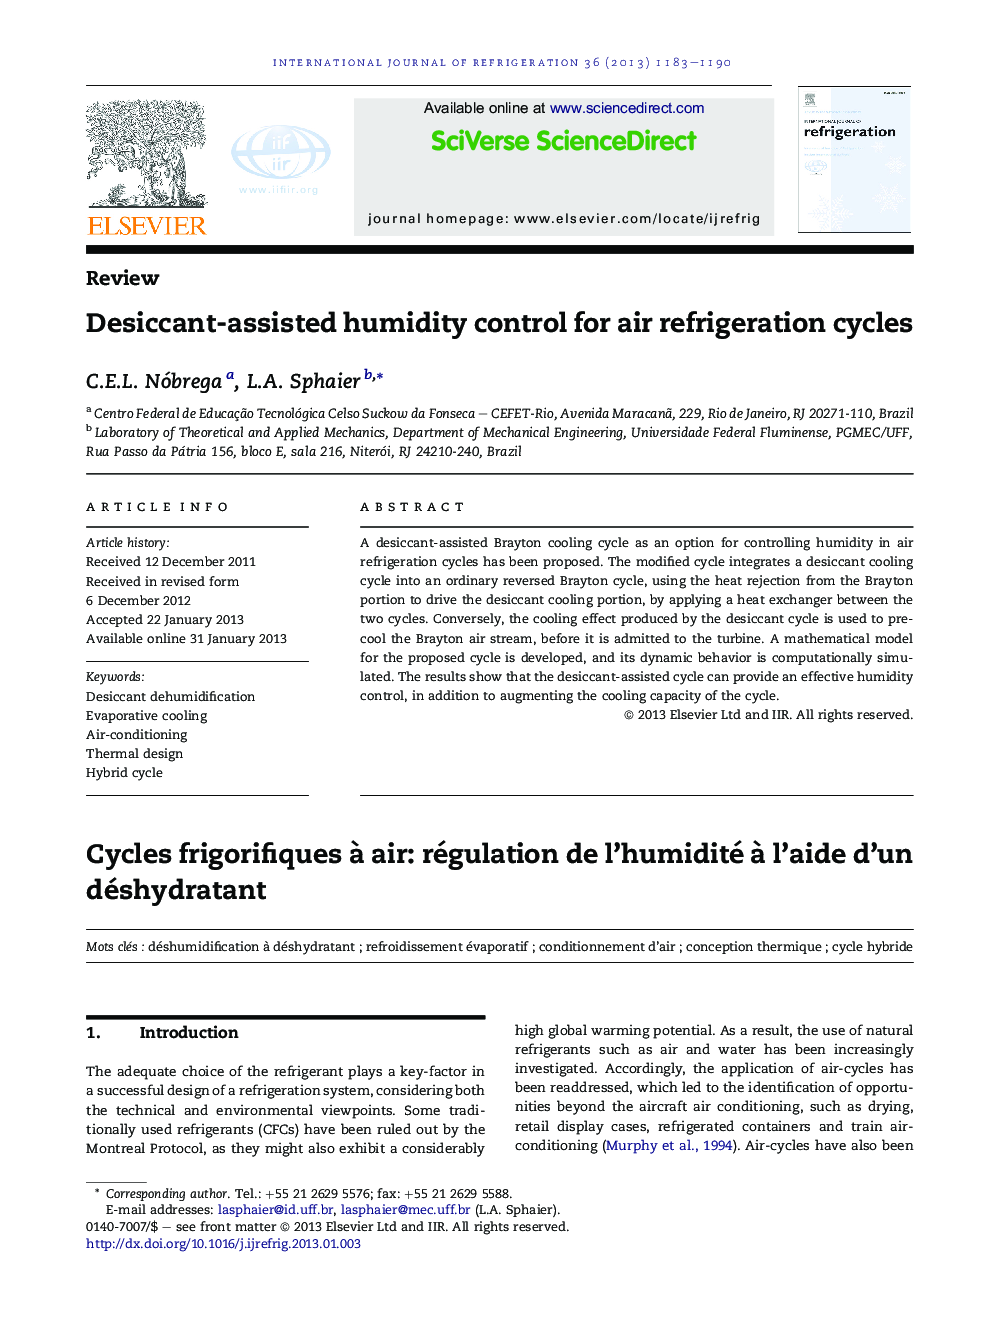 Desiccant-assisted humidity control for air refrigeration cycles